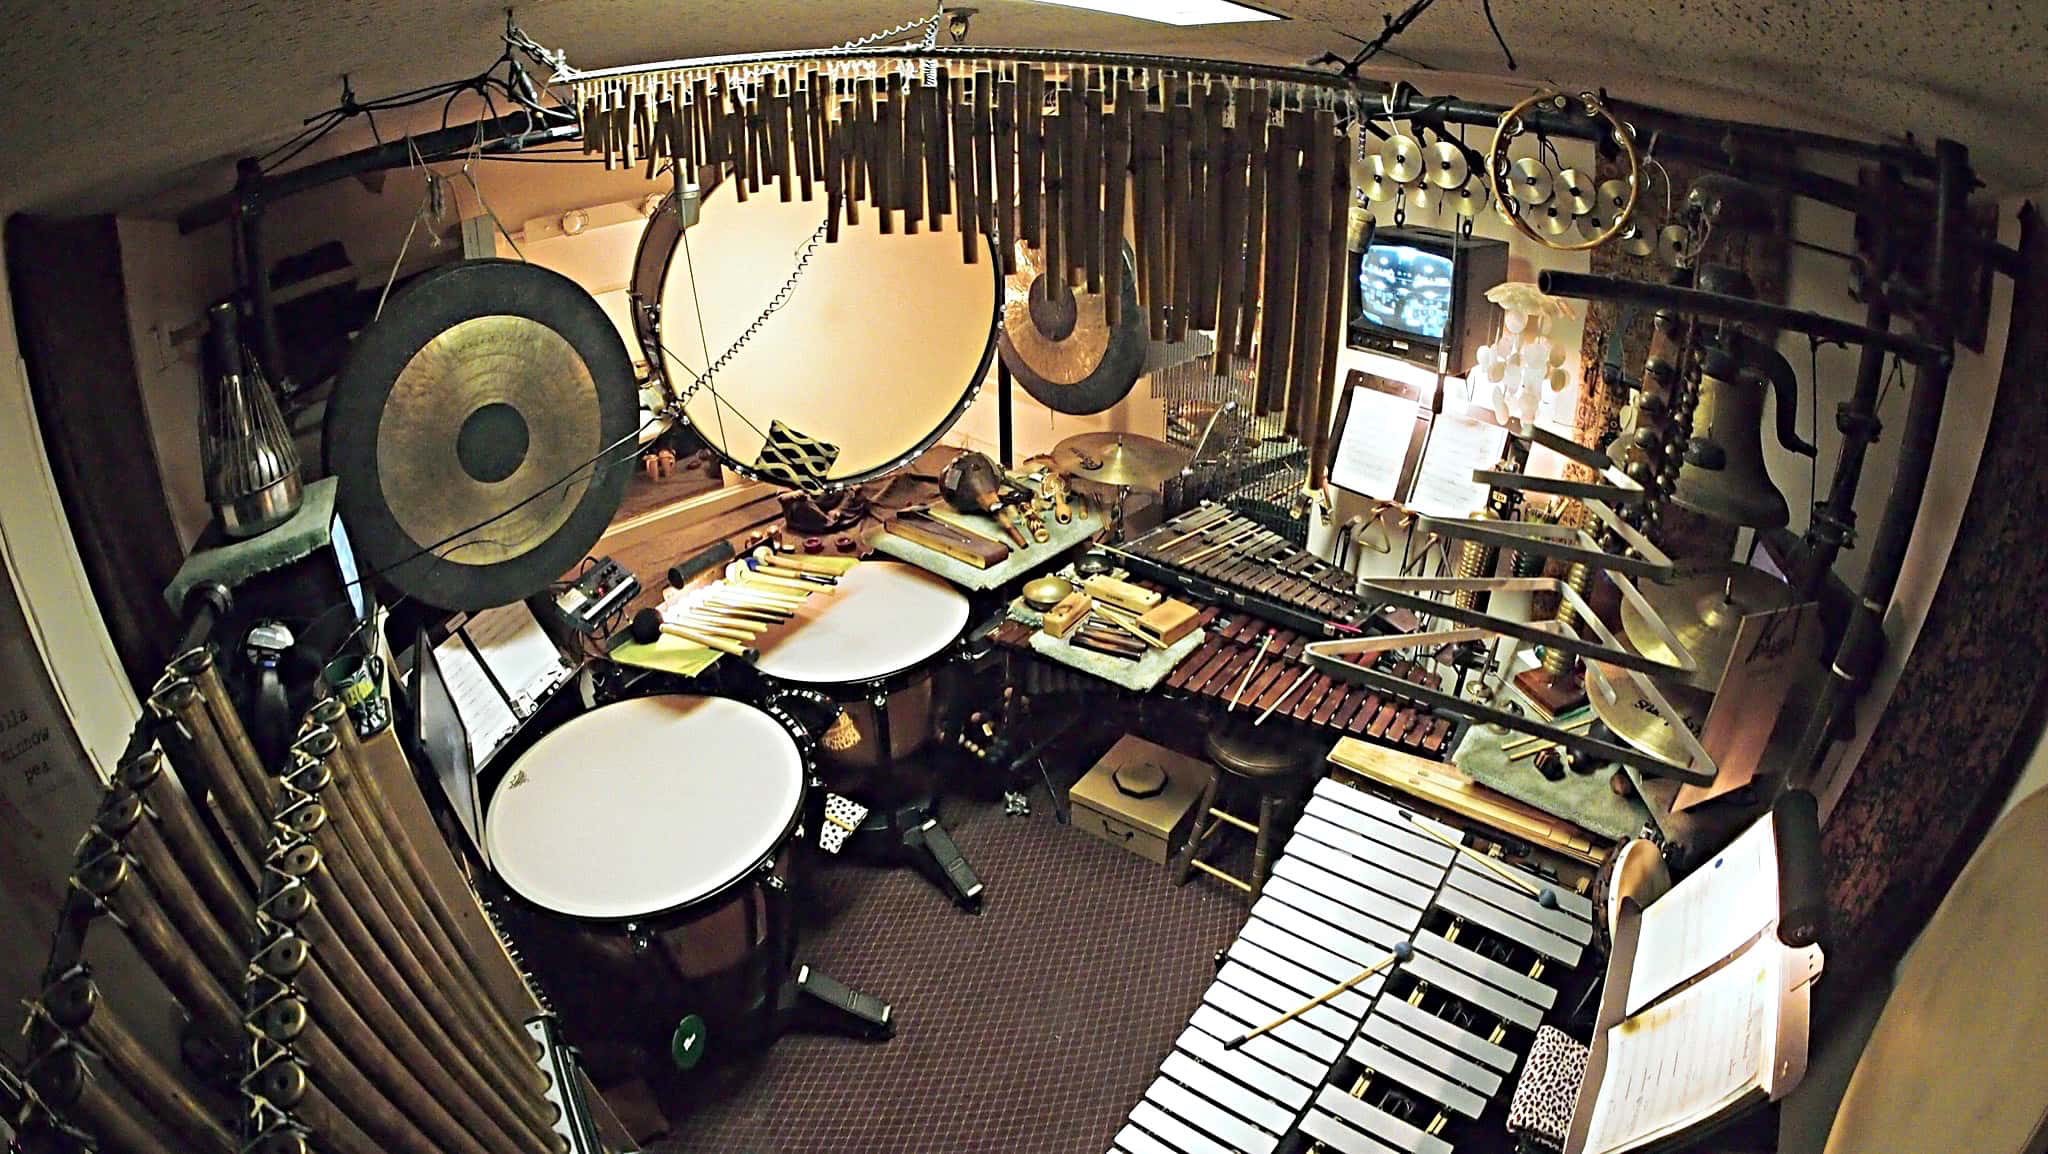 Andy Jones' percussion setup for the currently running Broadway production of Wicked at the Gershwin Theatre.